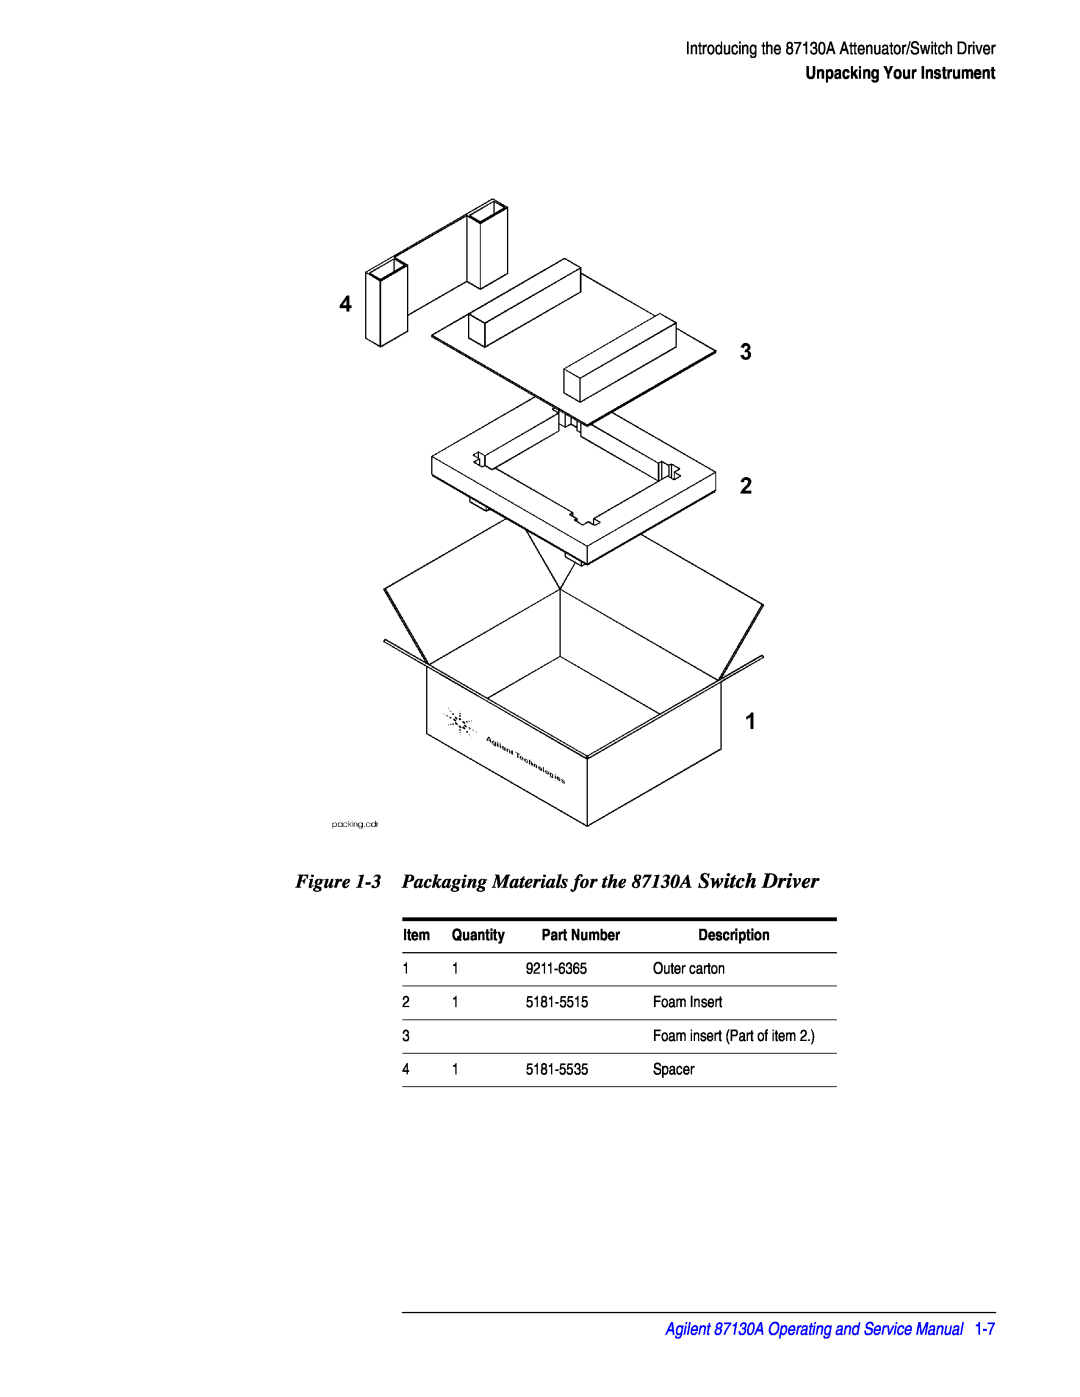 Agilent Technologies manual 3 Packaging Materials for the 87130A Switch Driver, Unpacking Your Instrument, Quantity 